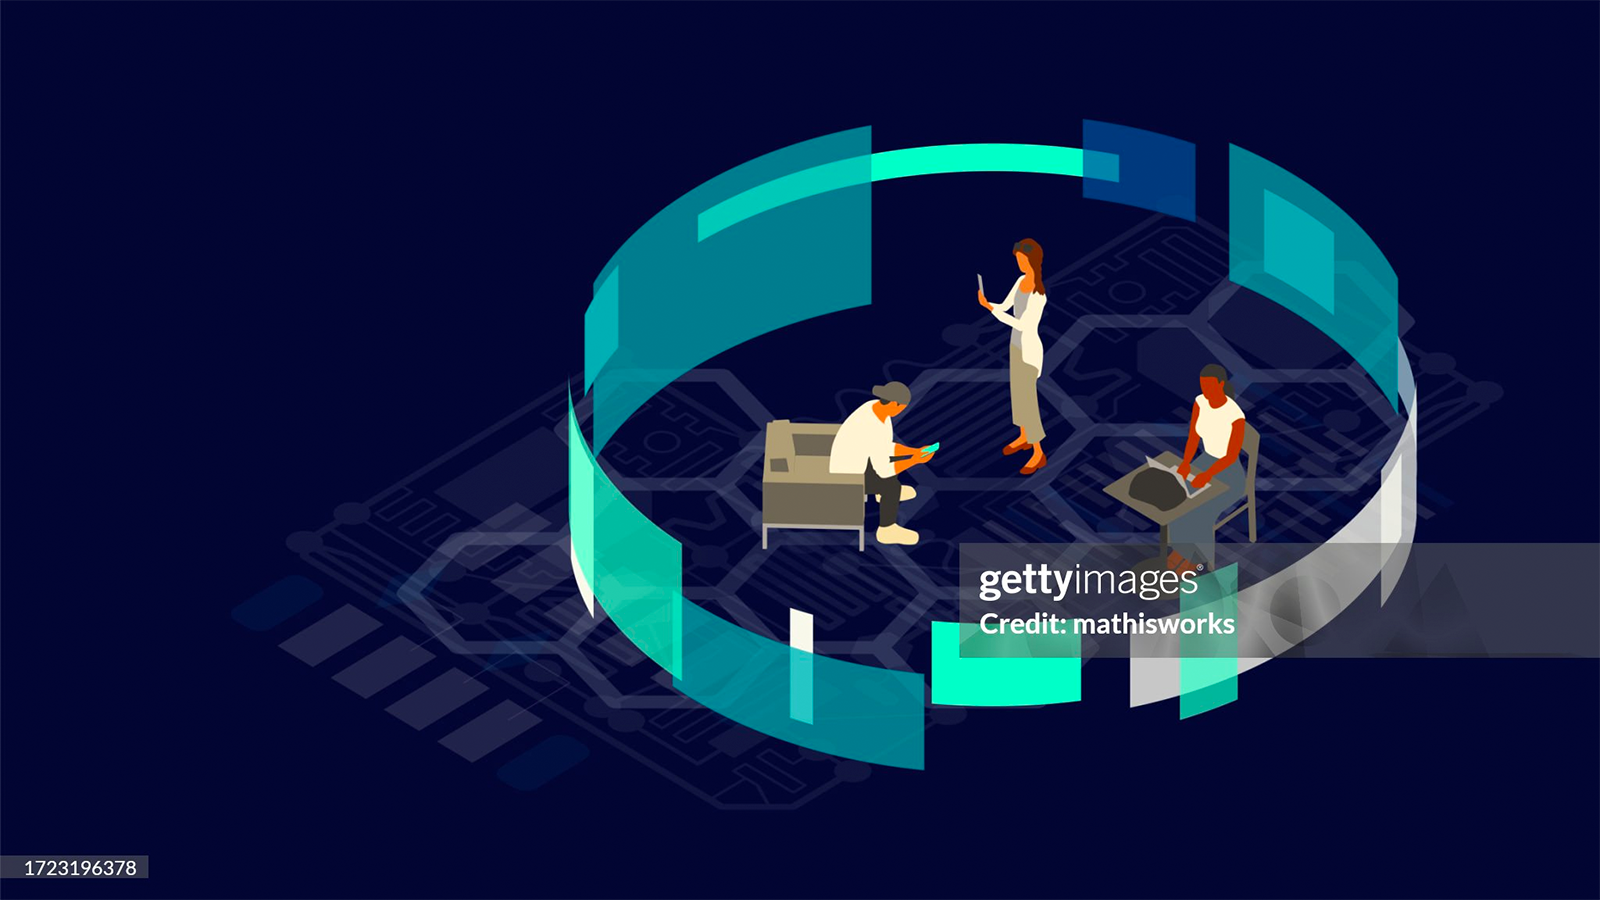 An illustration sample includes isometric people using devices